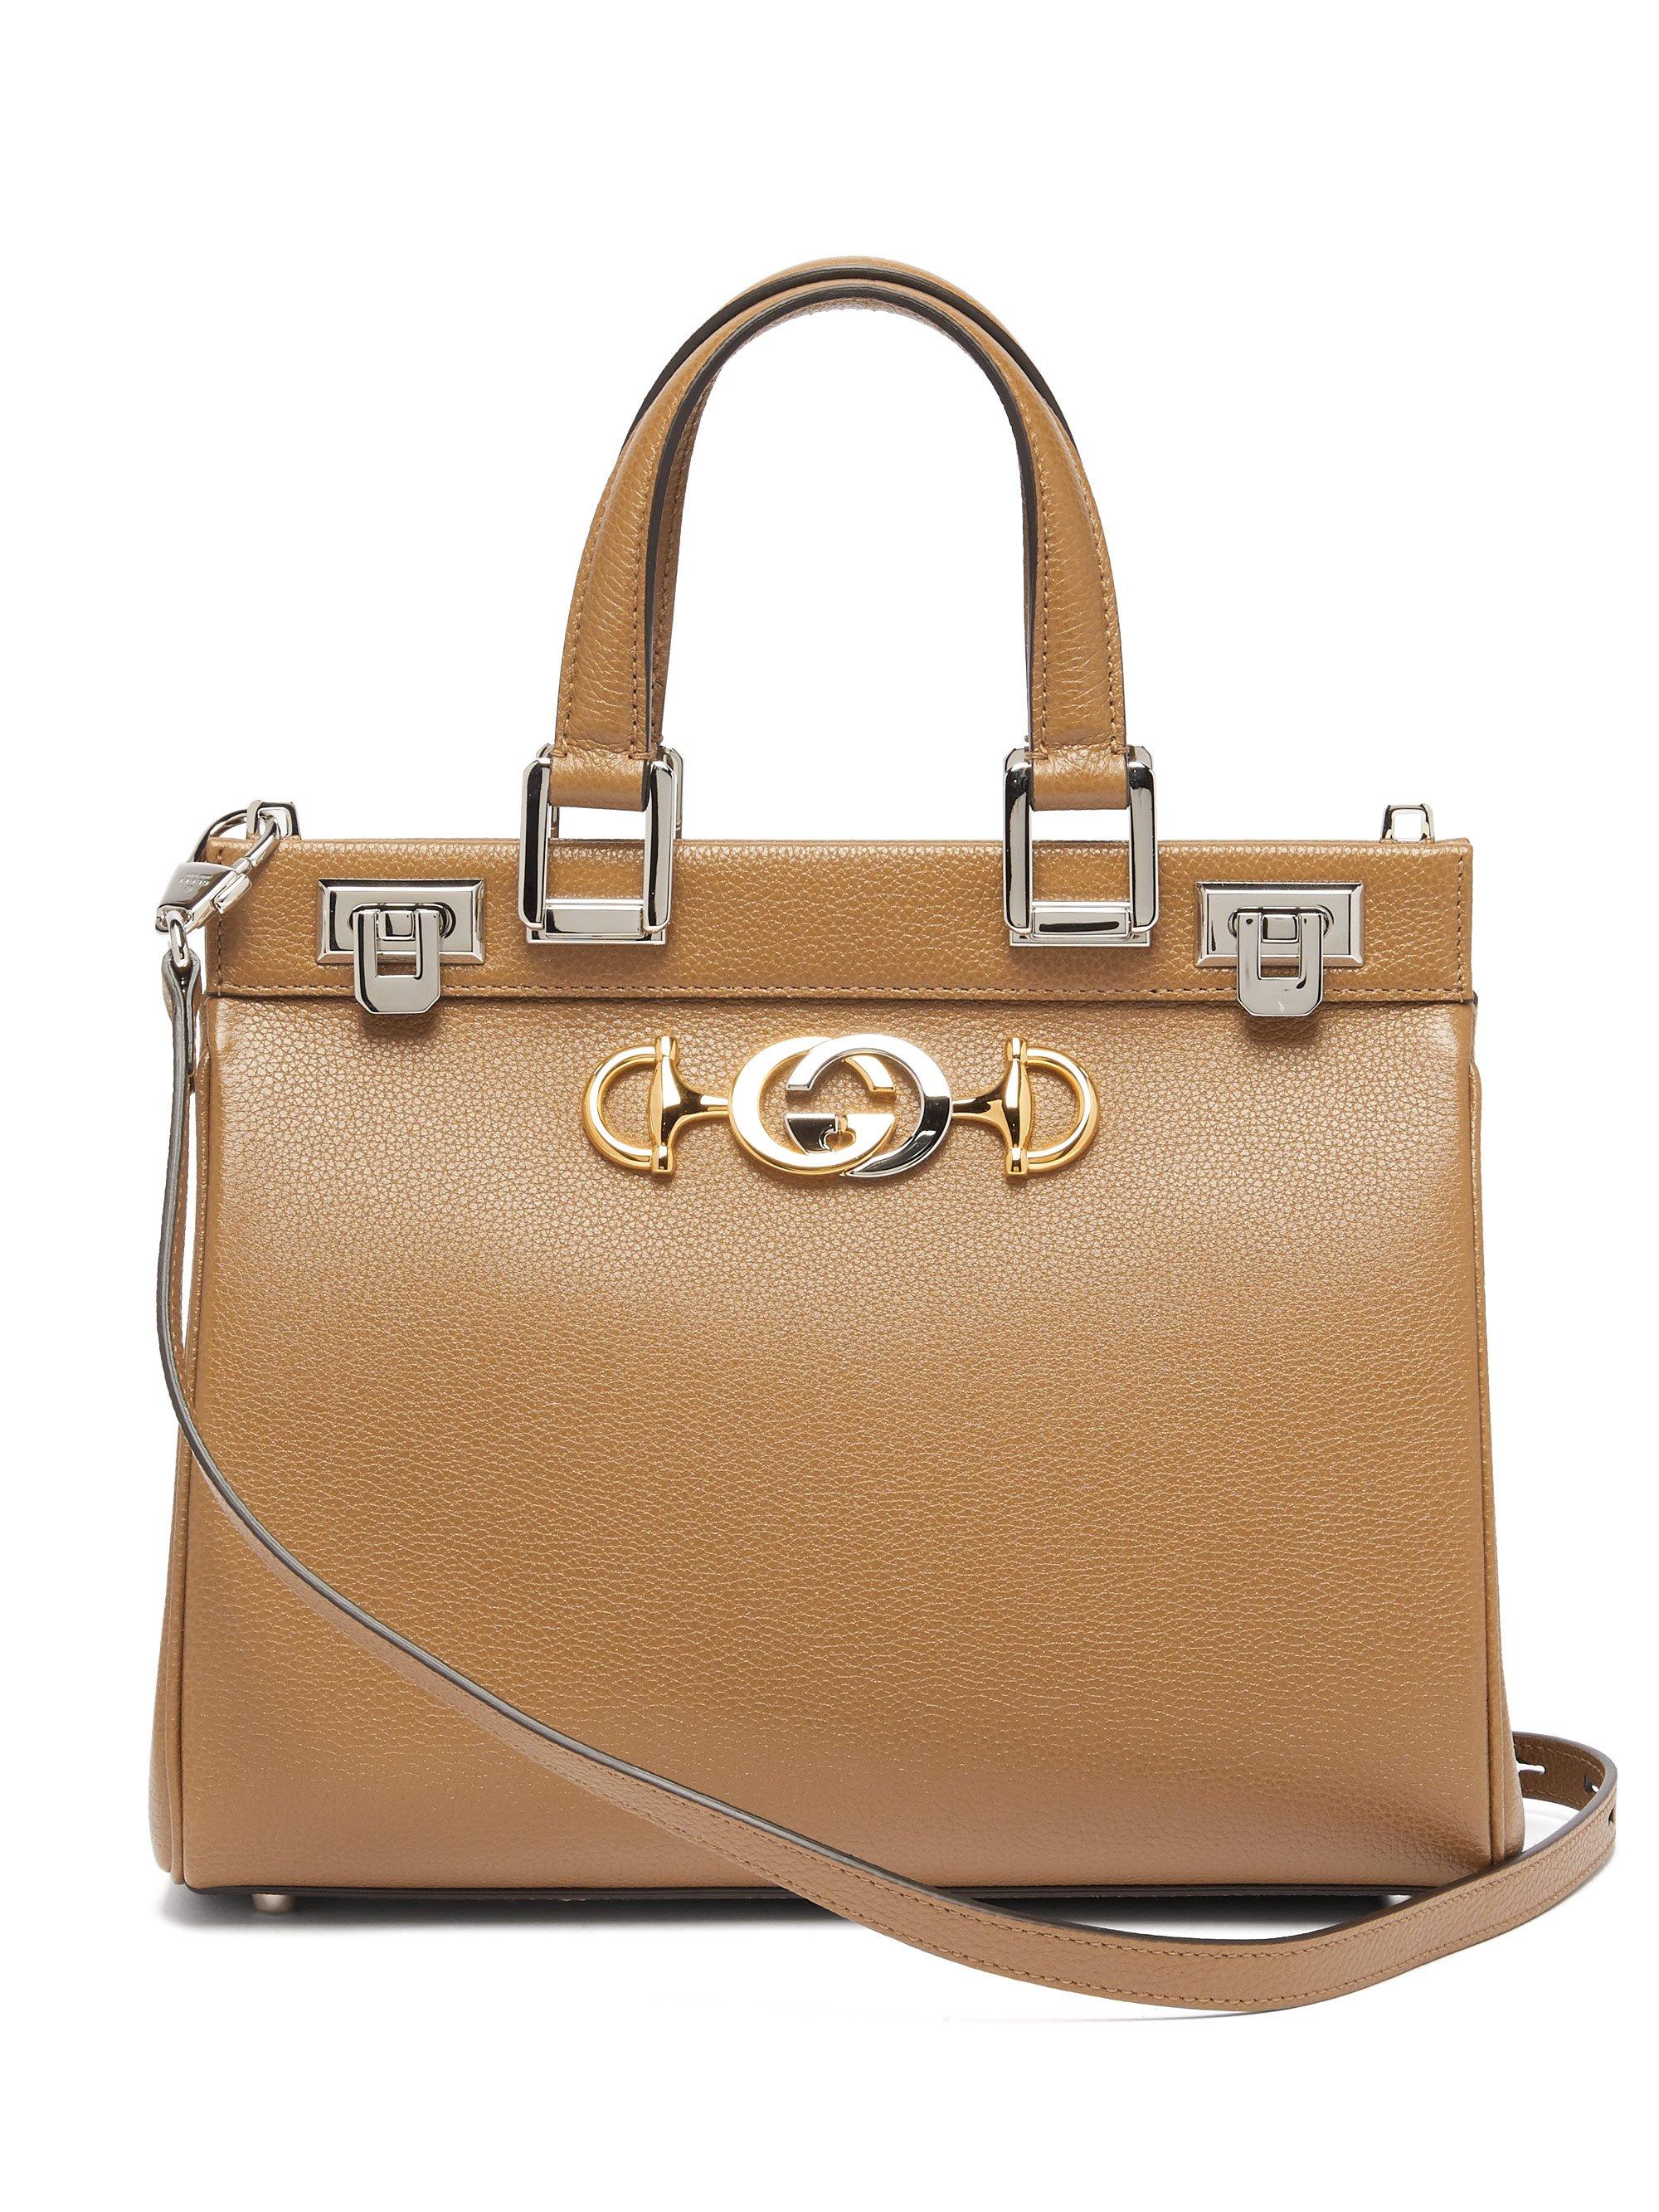 Gucci Zumi Grainy Leather Small Top Handle Bag in Natural | Lyst